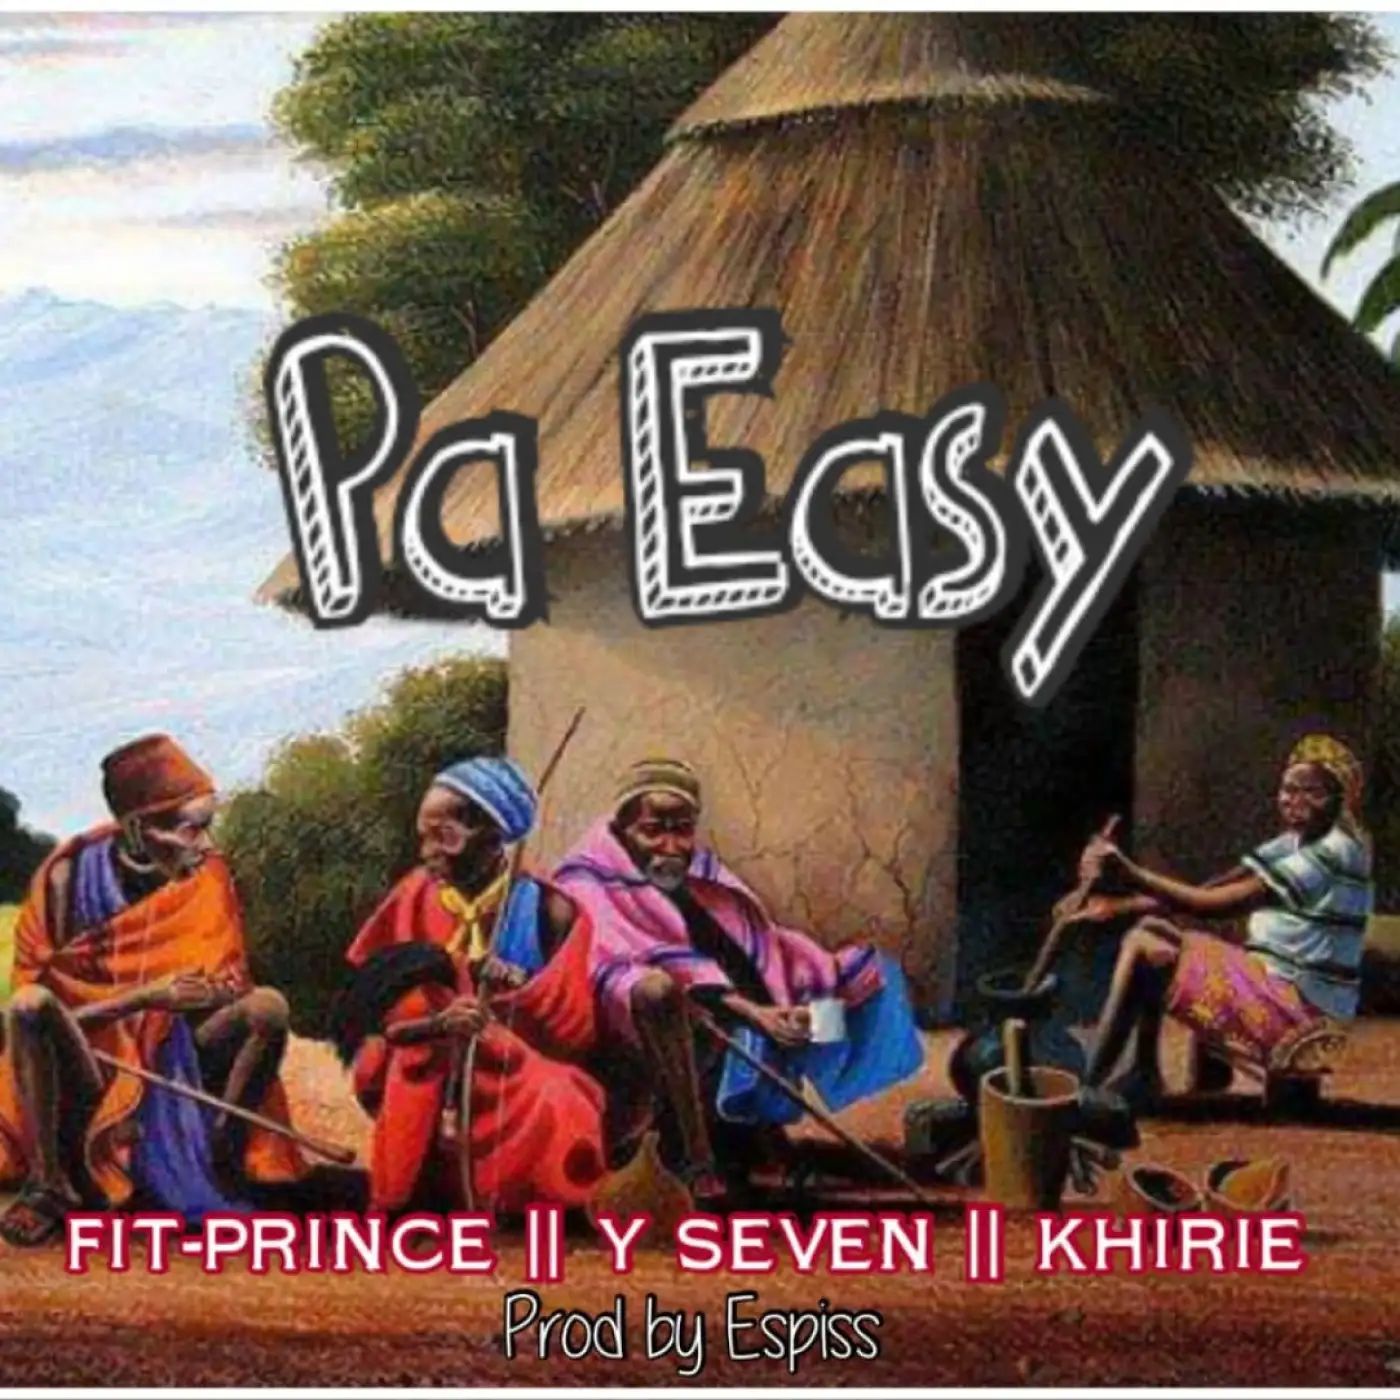 fit-prince-ndili-pa-easy-ft-y-seven-khirie-prod-espiss-mp3-download-Malawi Music Downloader